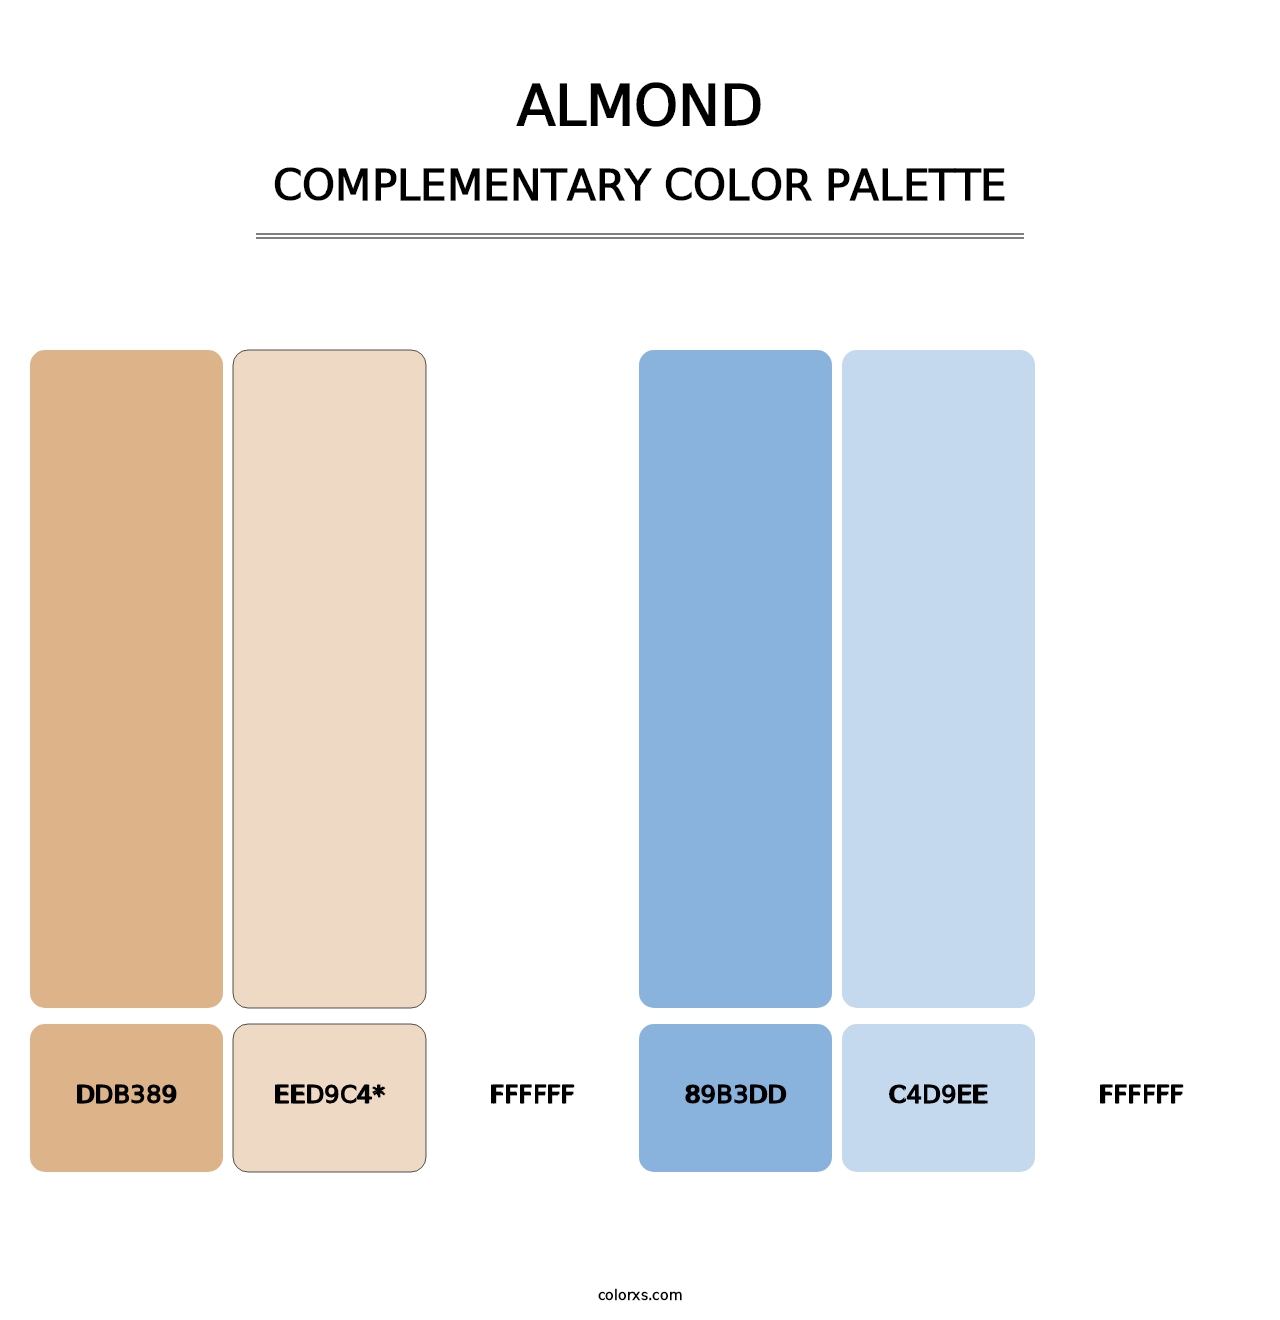 Almond - Complementary Color Palette